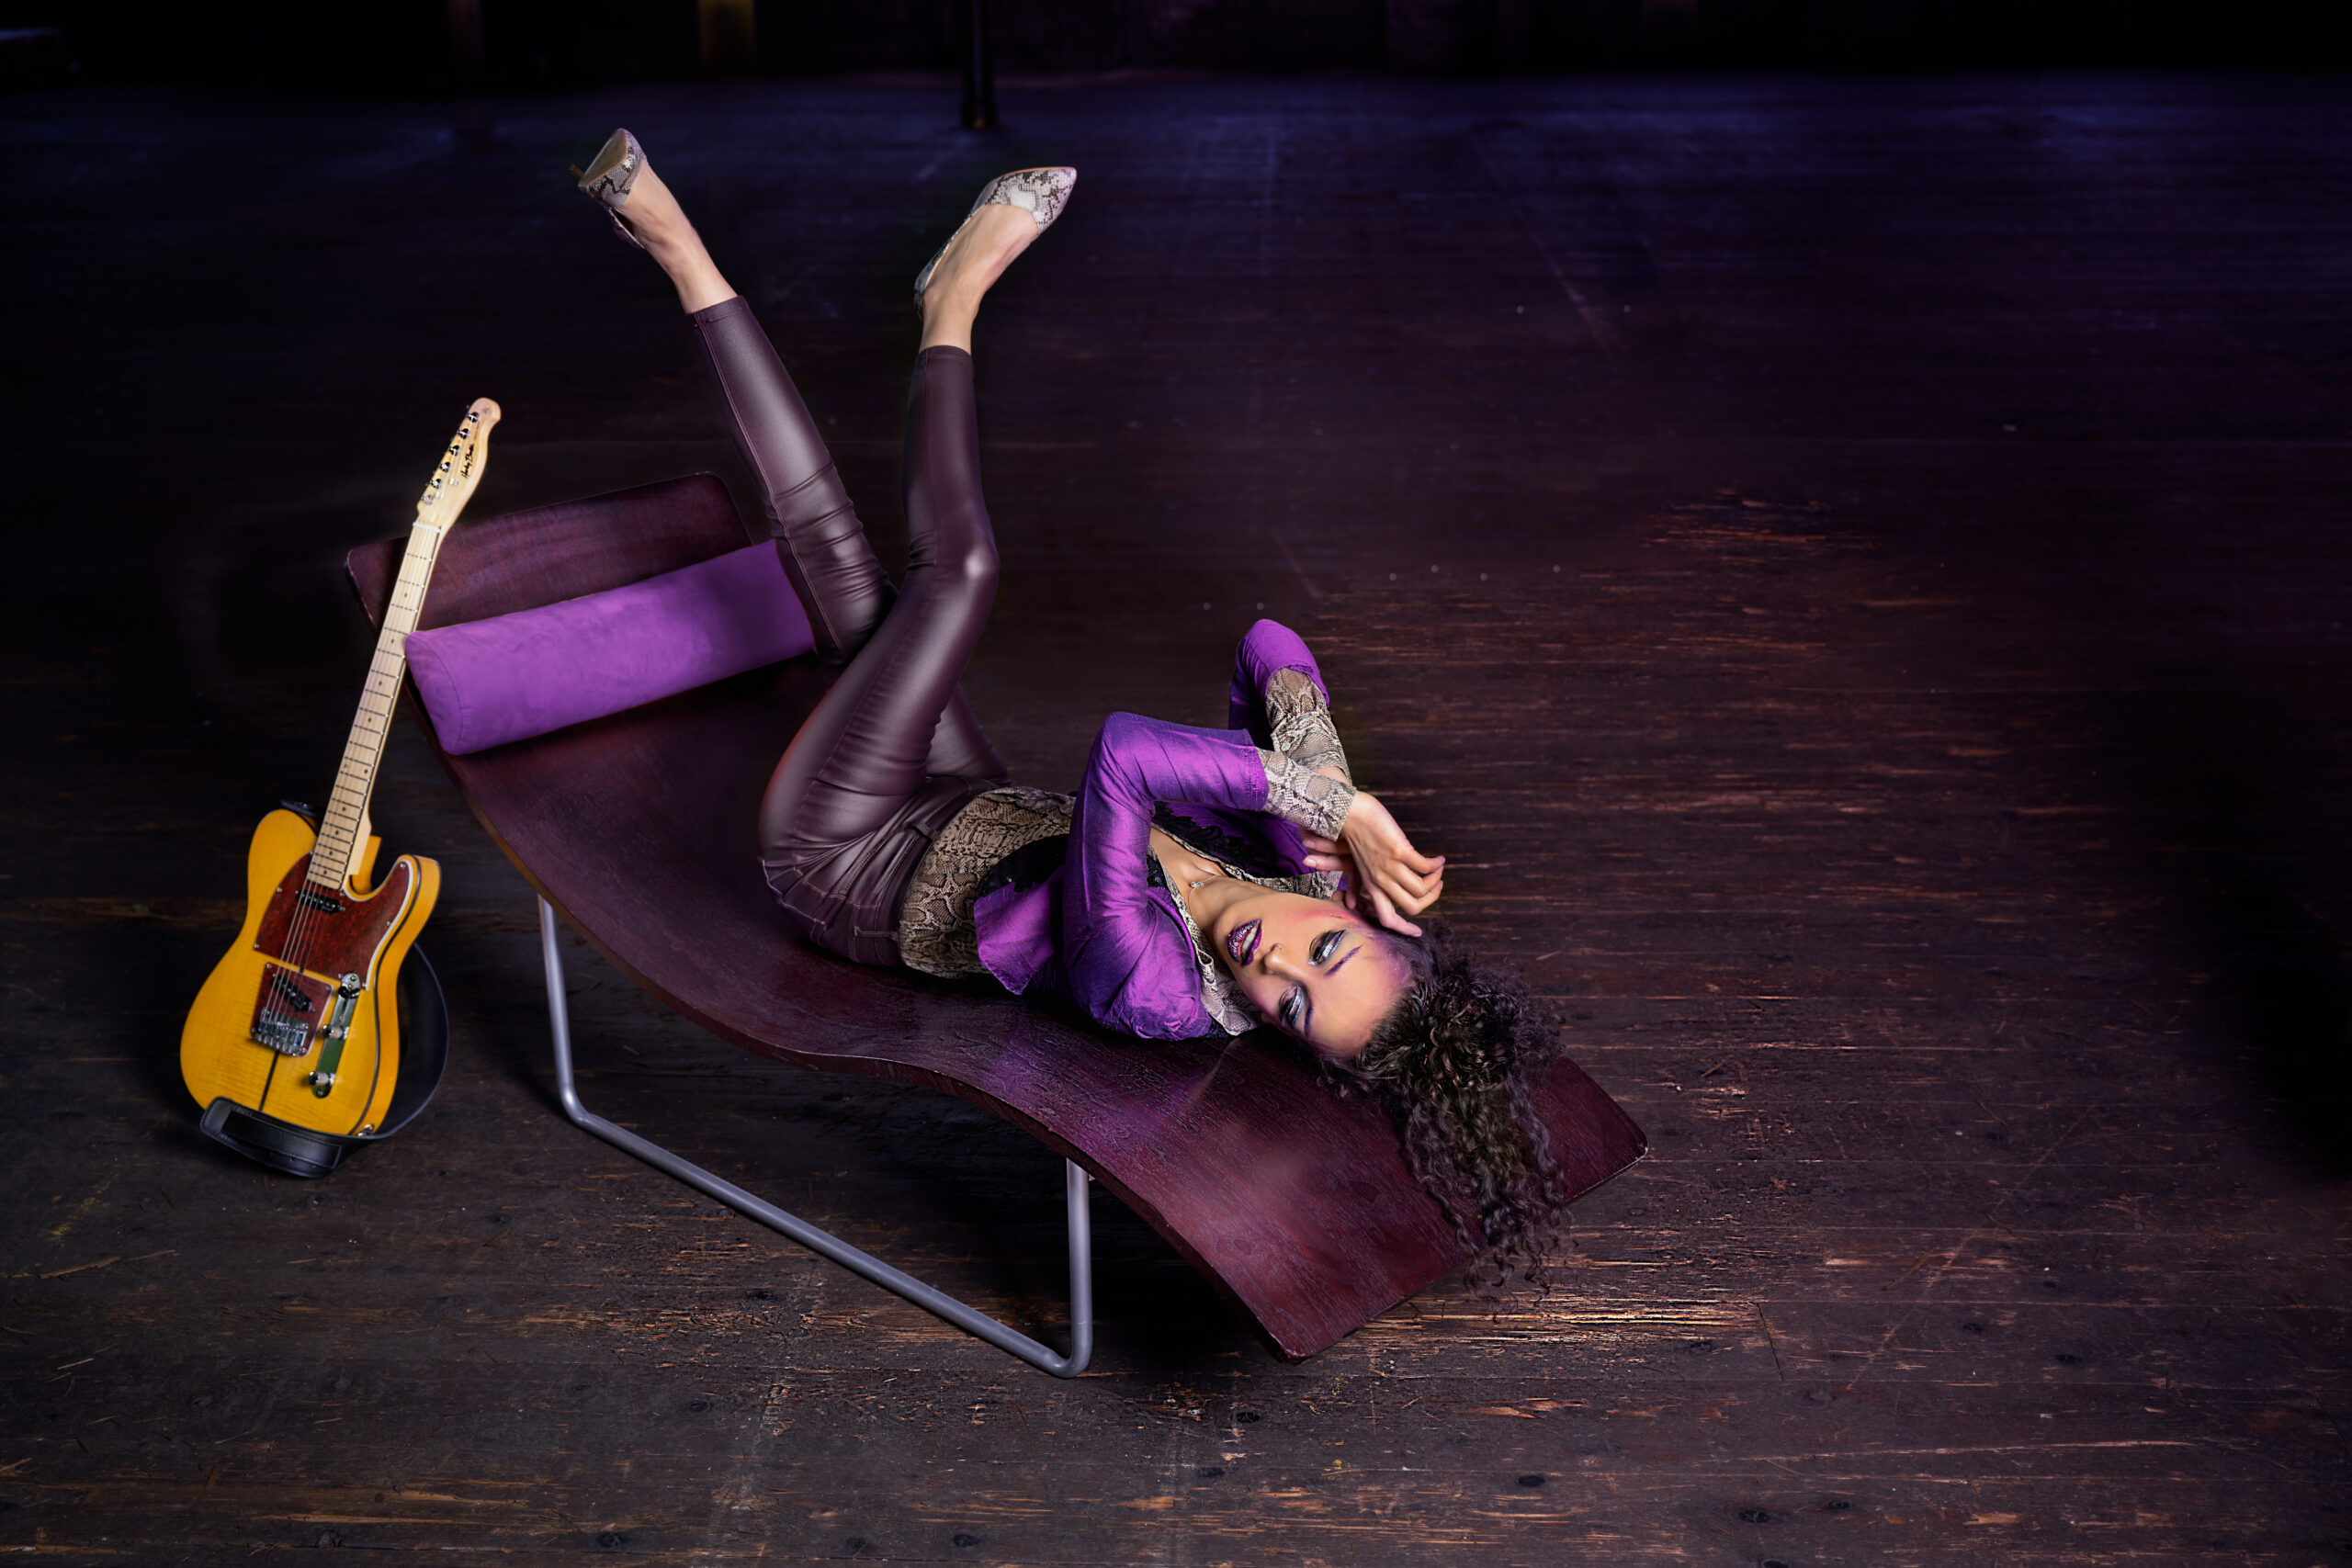 Image features a model in character as the musician Prince, lying on a 1970s wooden chaise long next to replica t-style guitar in a mill studio